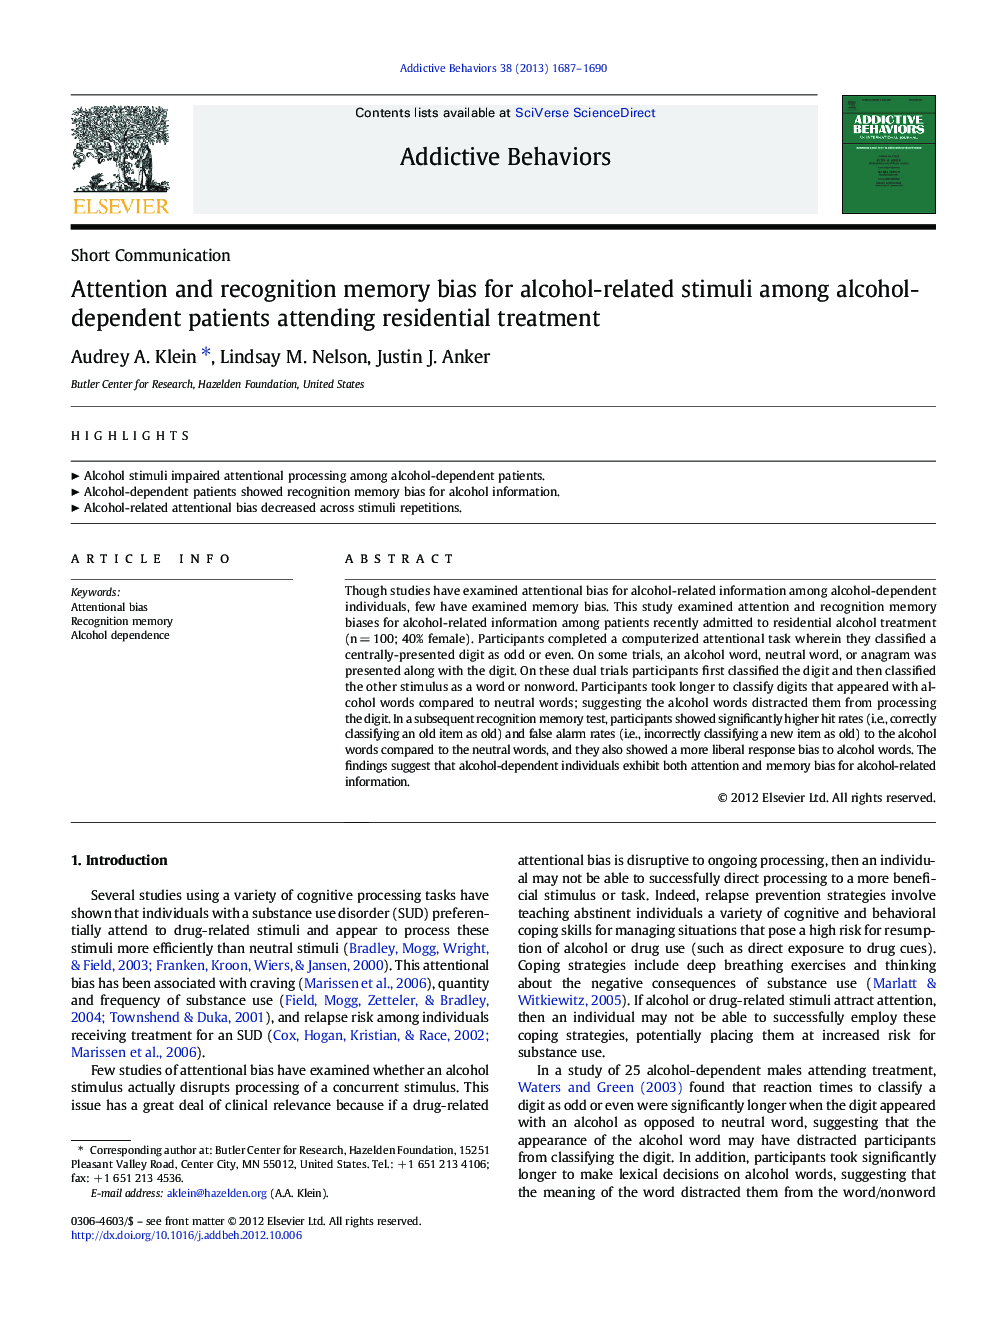 Attention and recognition memory bias for alcohol-related stimuli among alcohol-dependent patients attending residential treatment